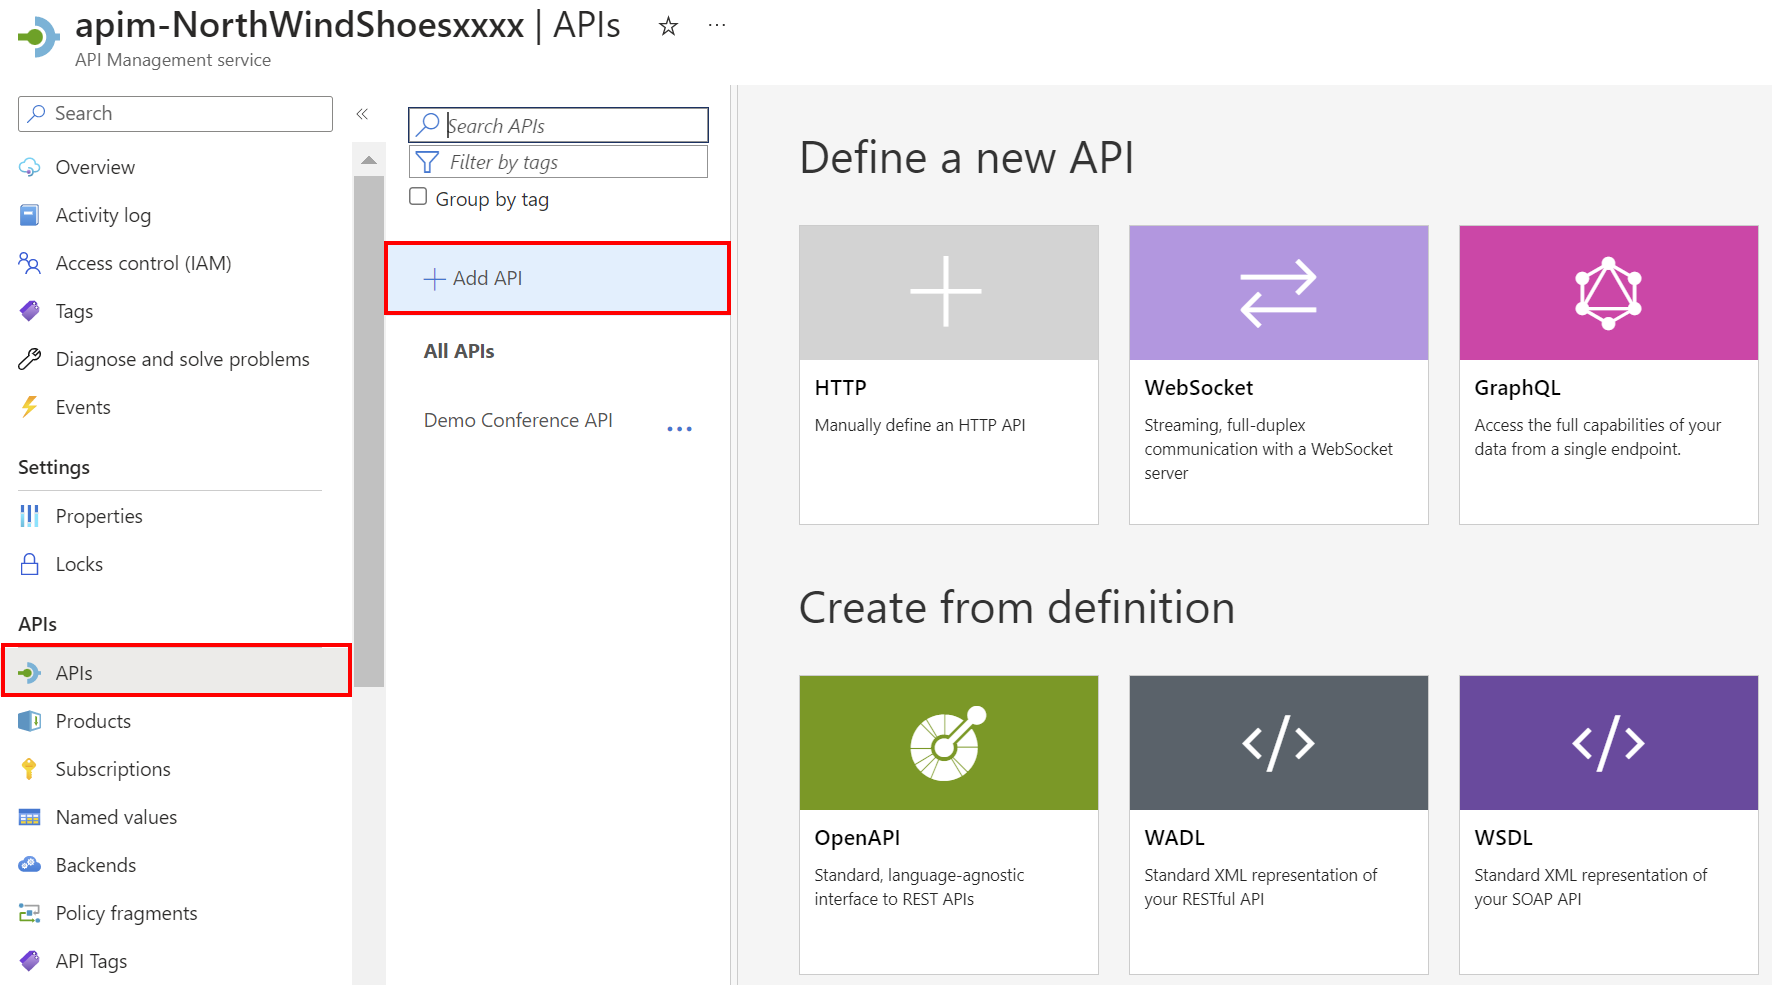 Screenshot of Azure portal showing API Management service with the APIs section highlighted and selected.